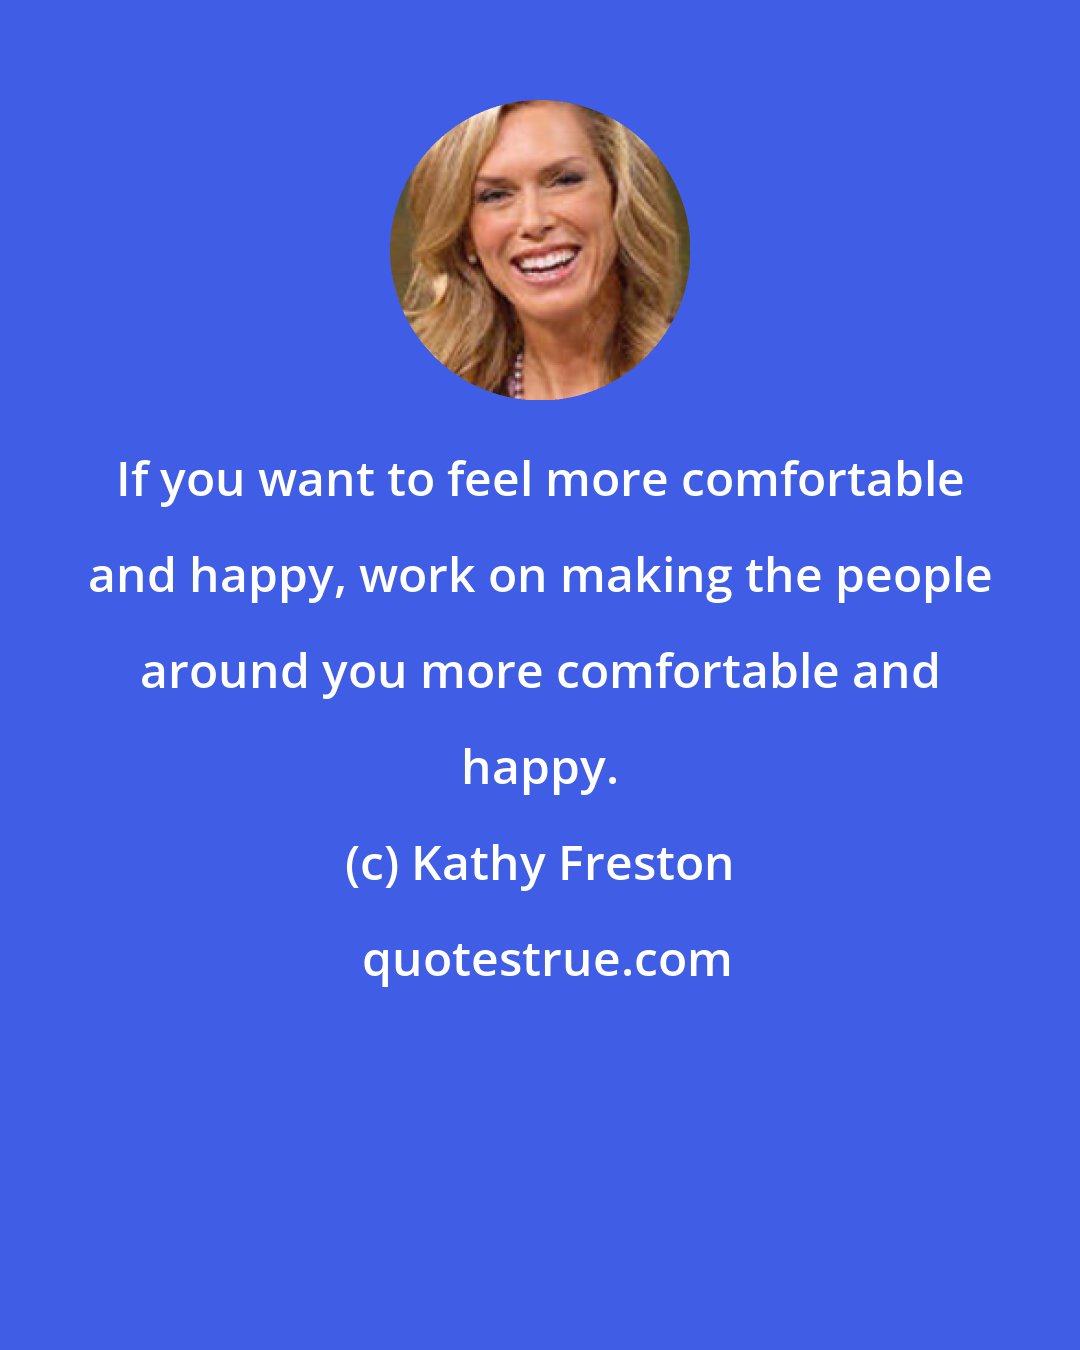 Kathy Freston: If you want to feel more comfortable and happy, work on making the people around you more comfortable and happy.